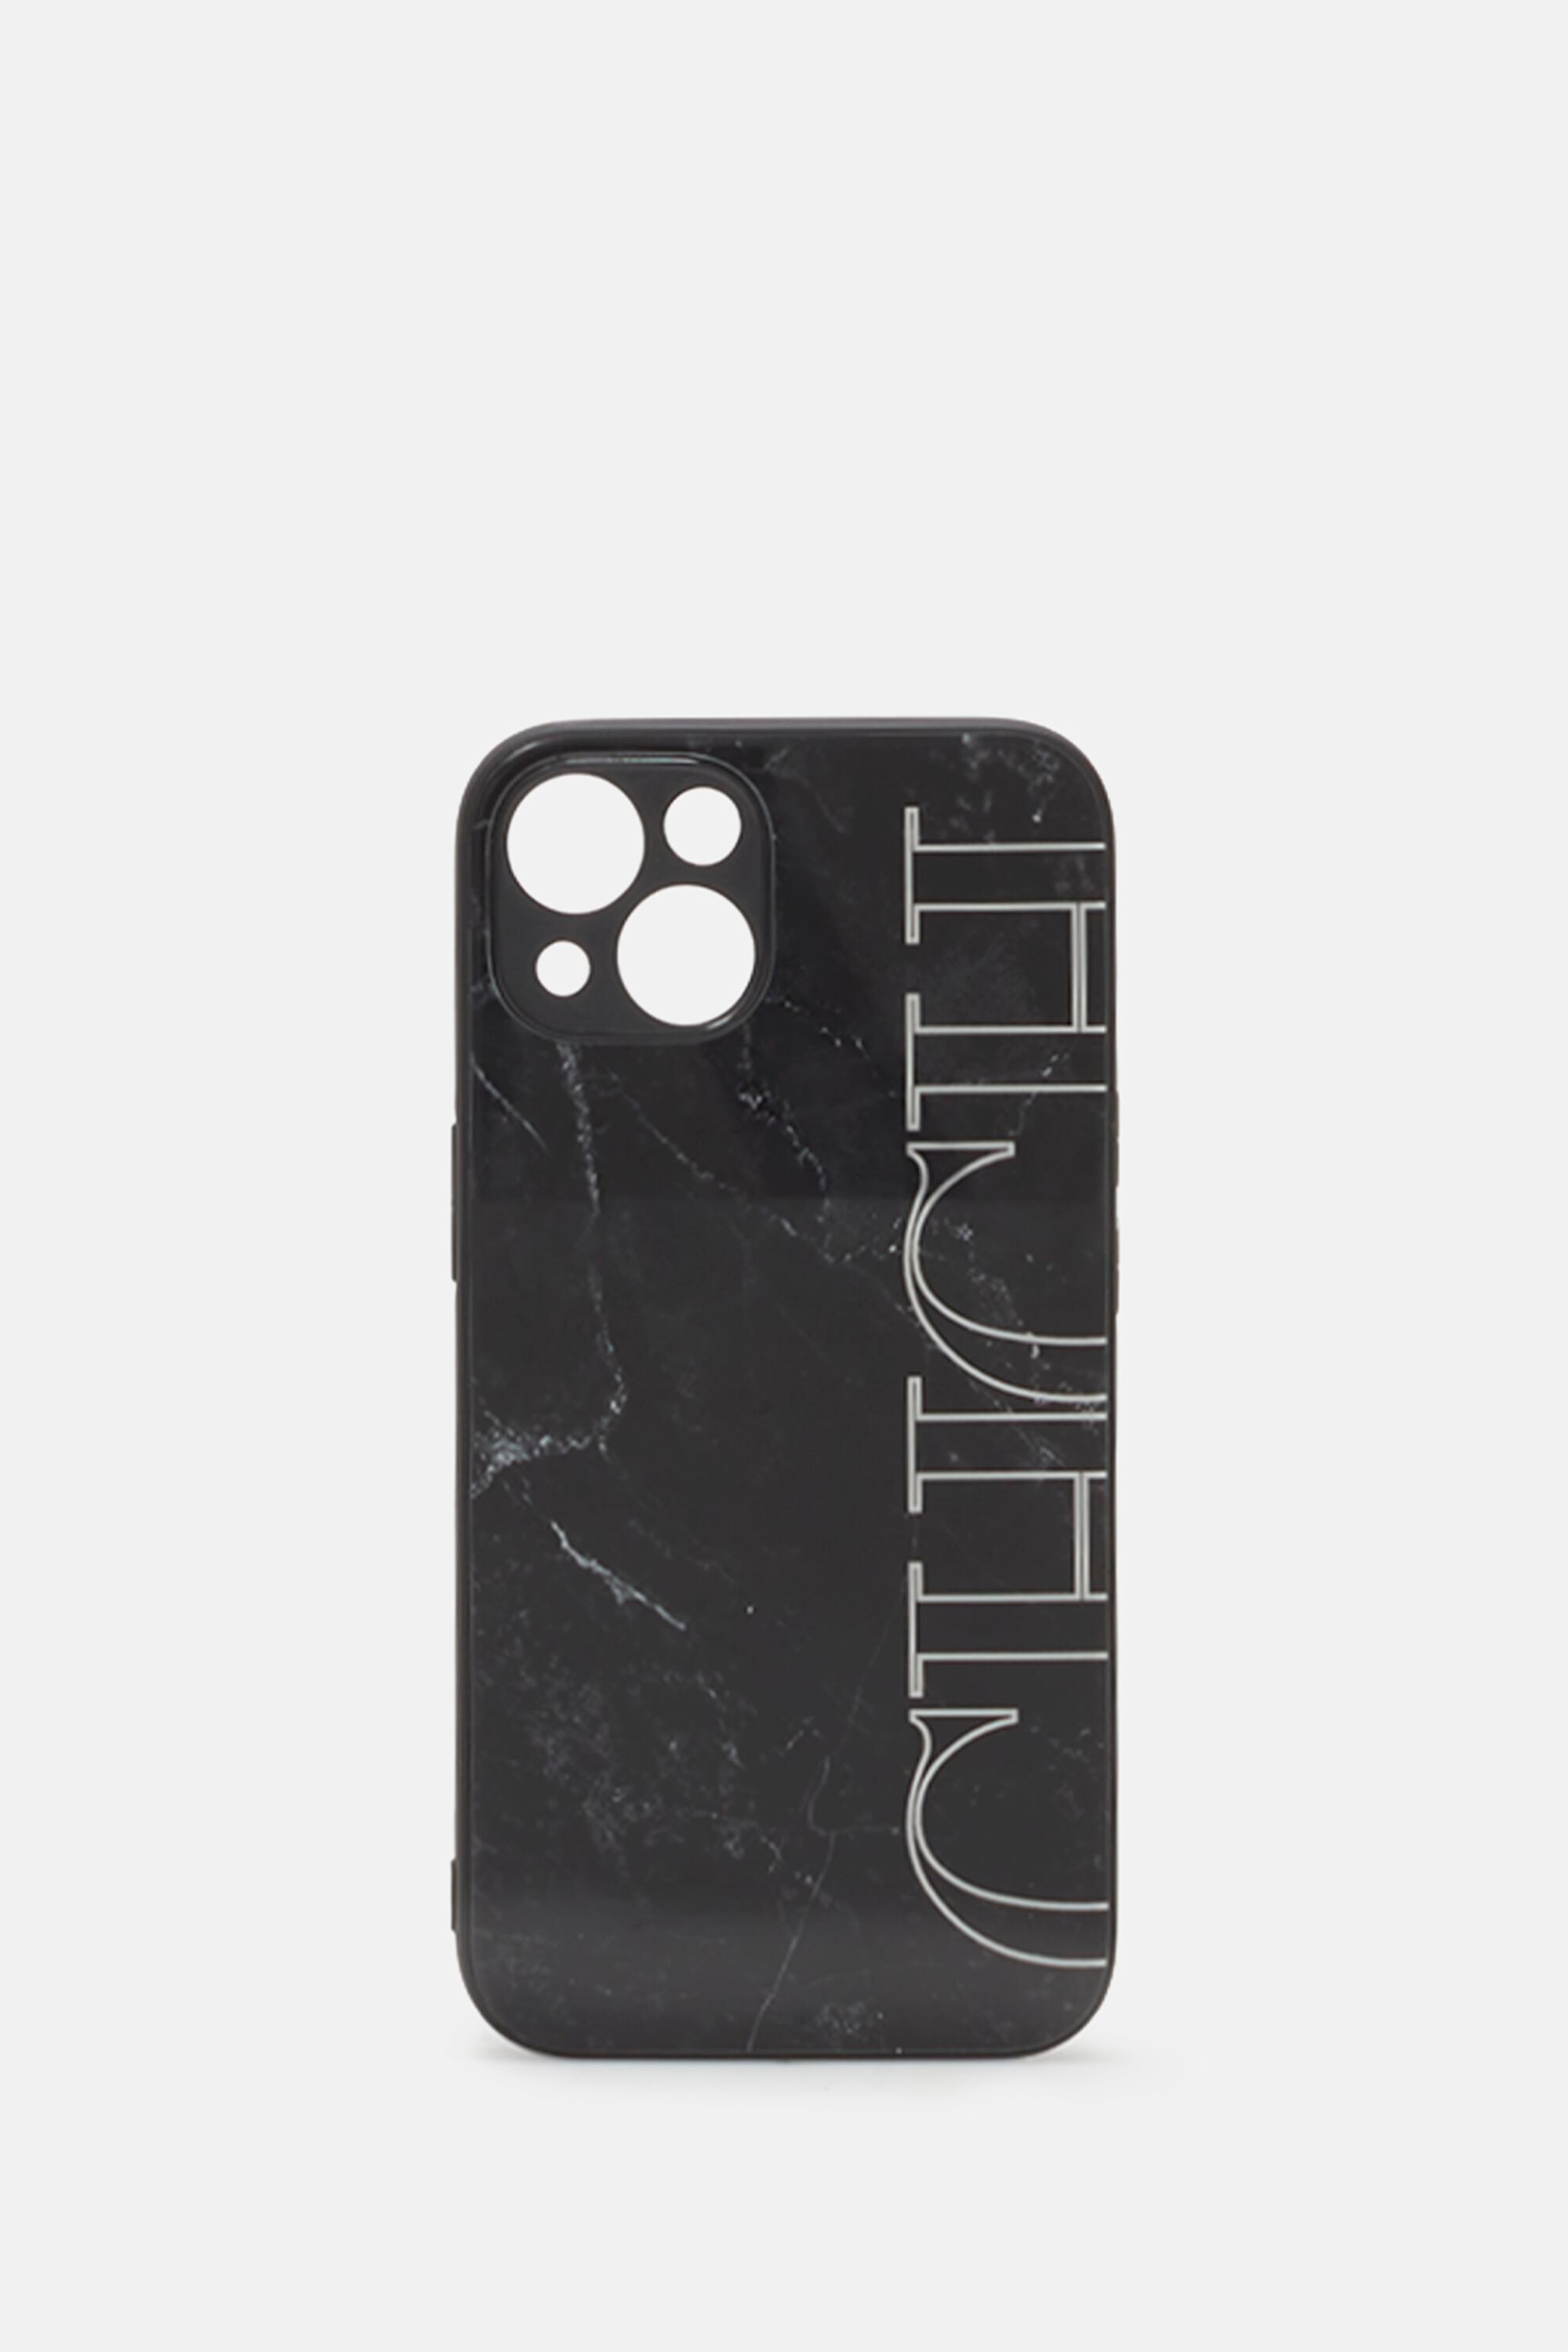 CHHC | iPhone 12 Pro Max case